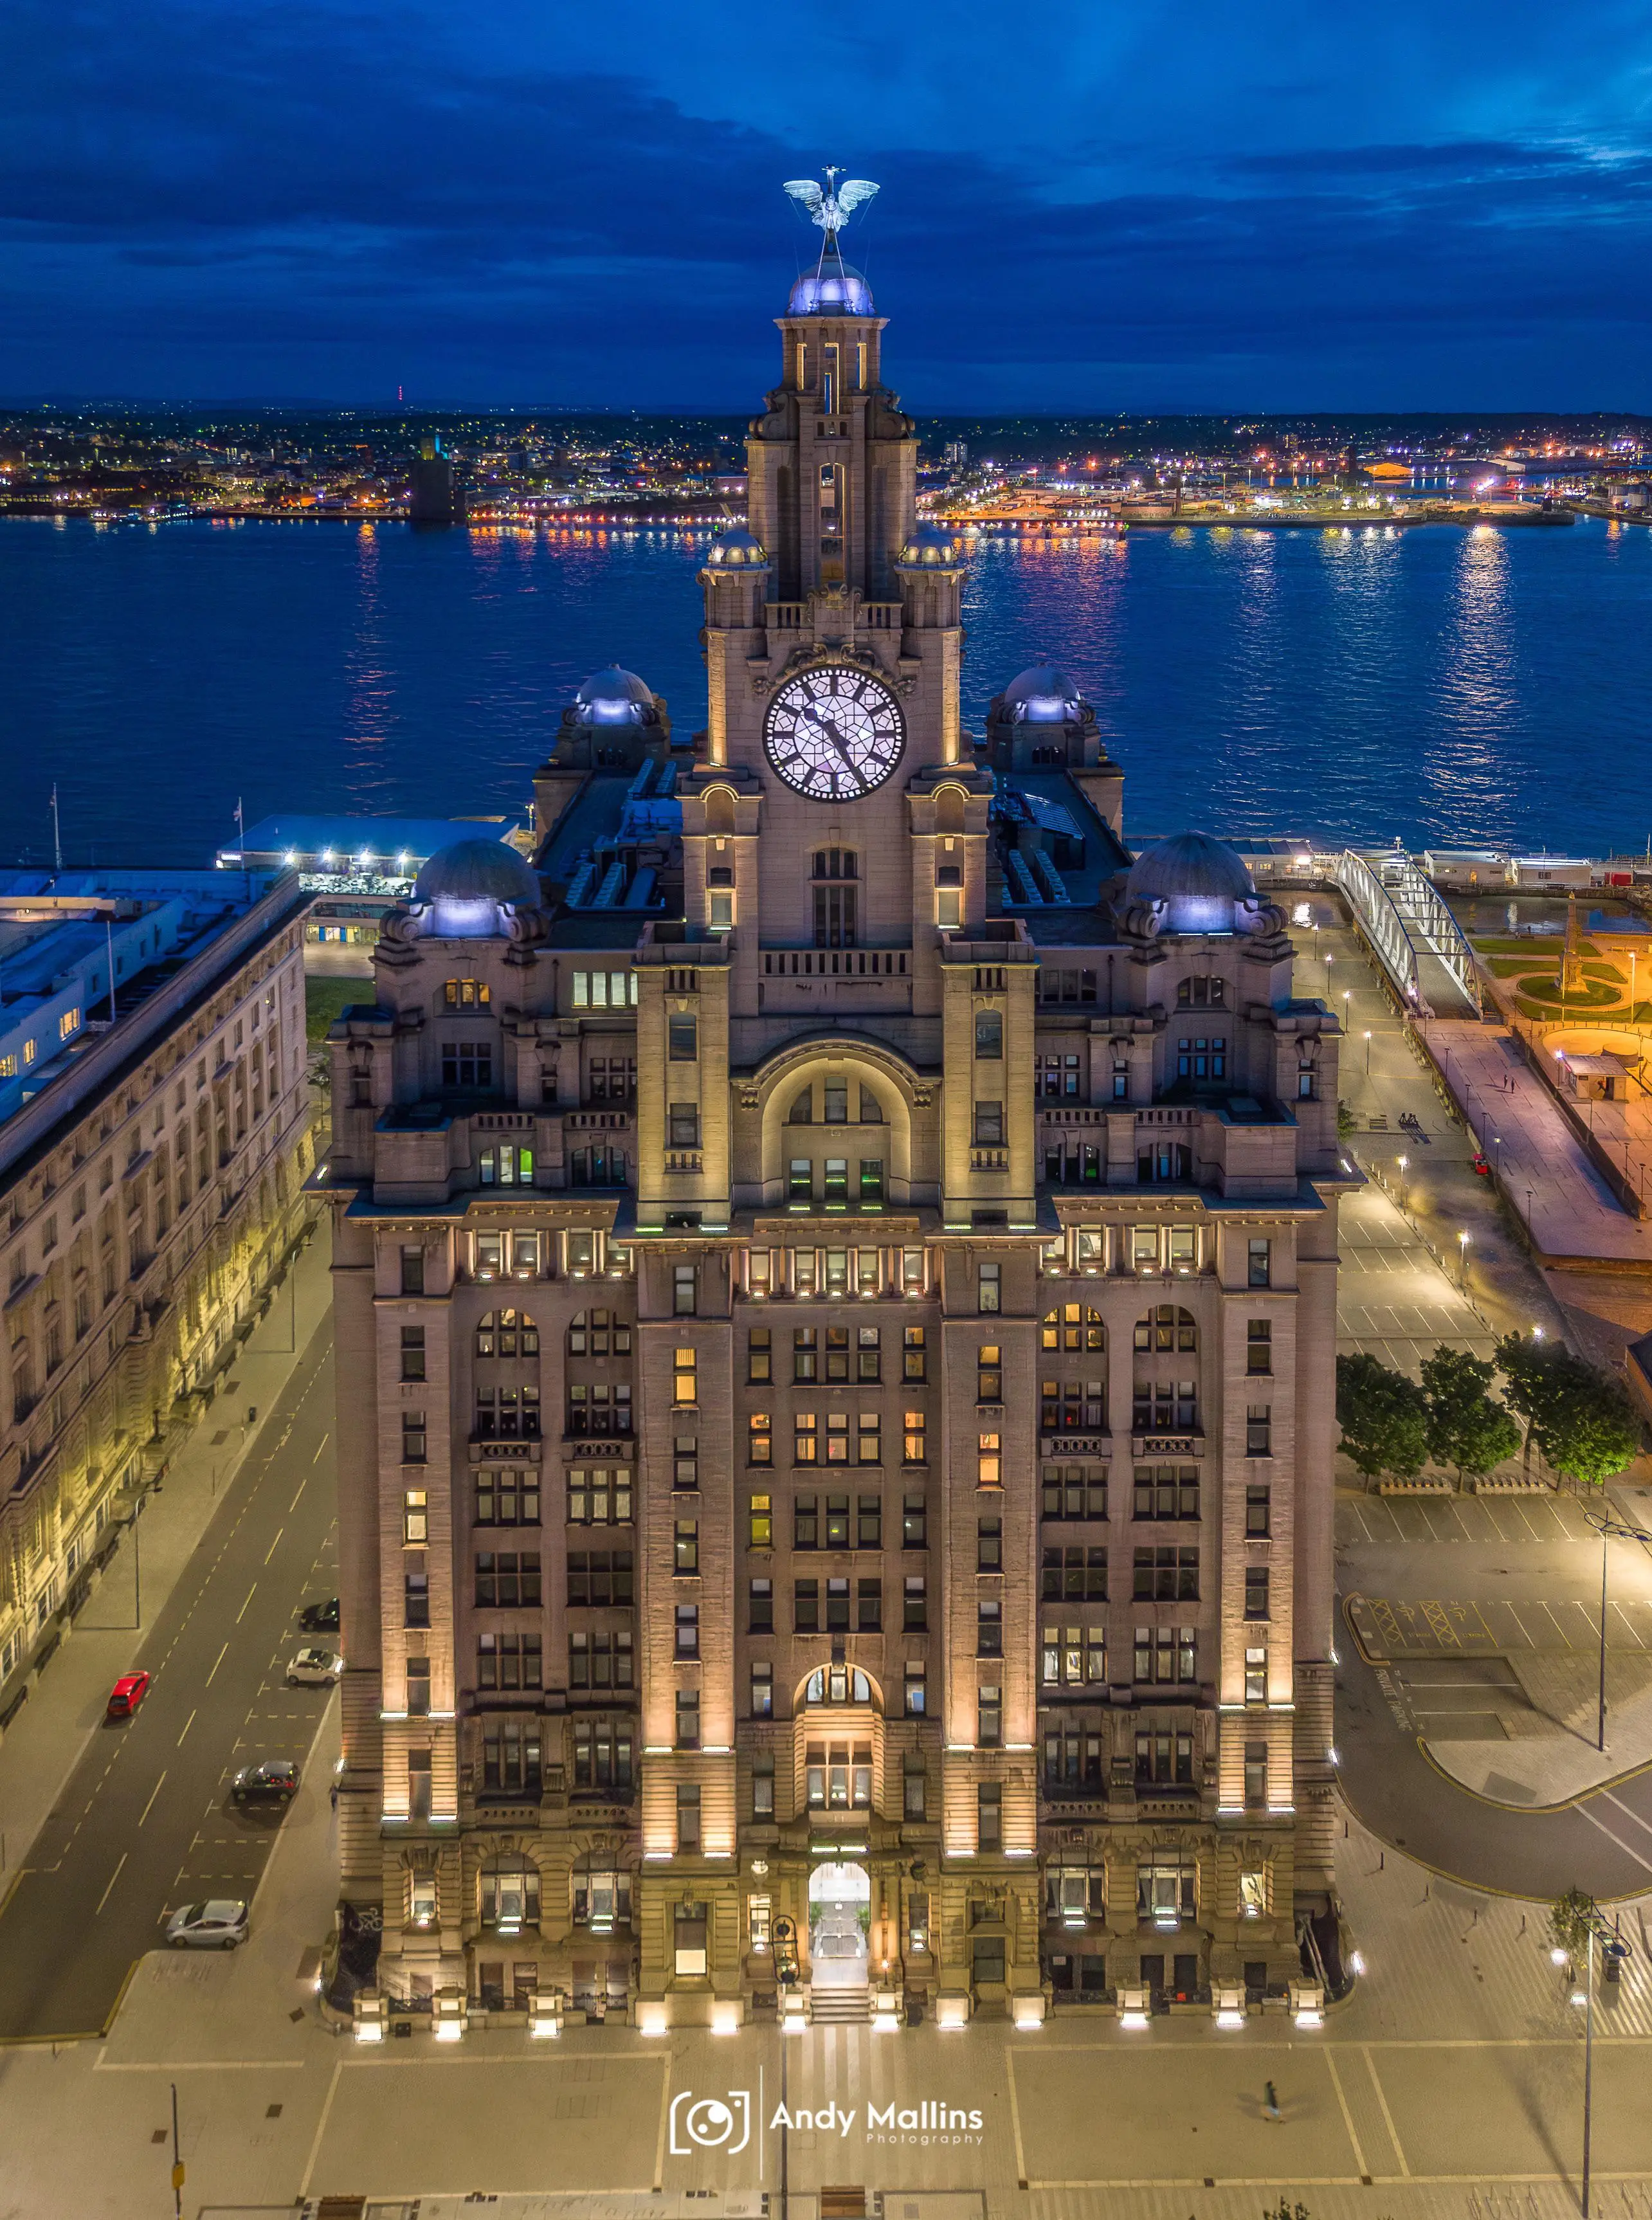 Liver Building taken by Andy Mallins